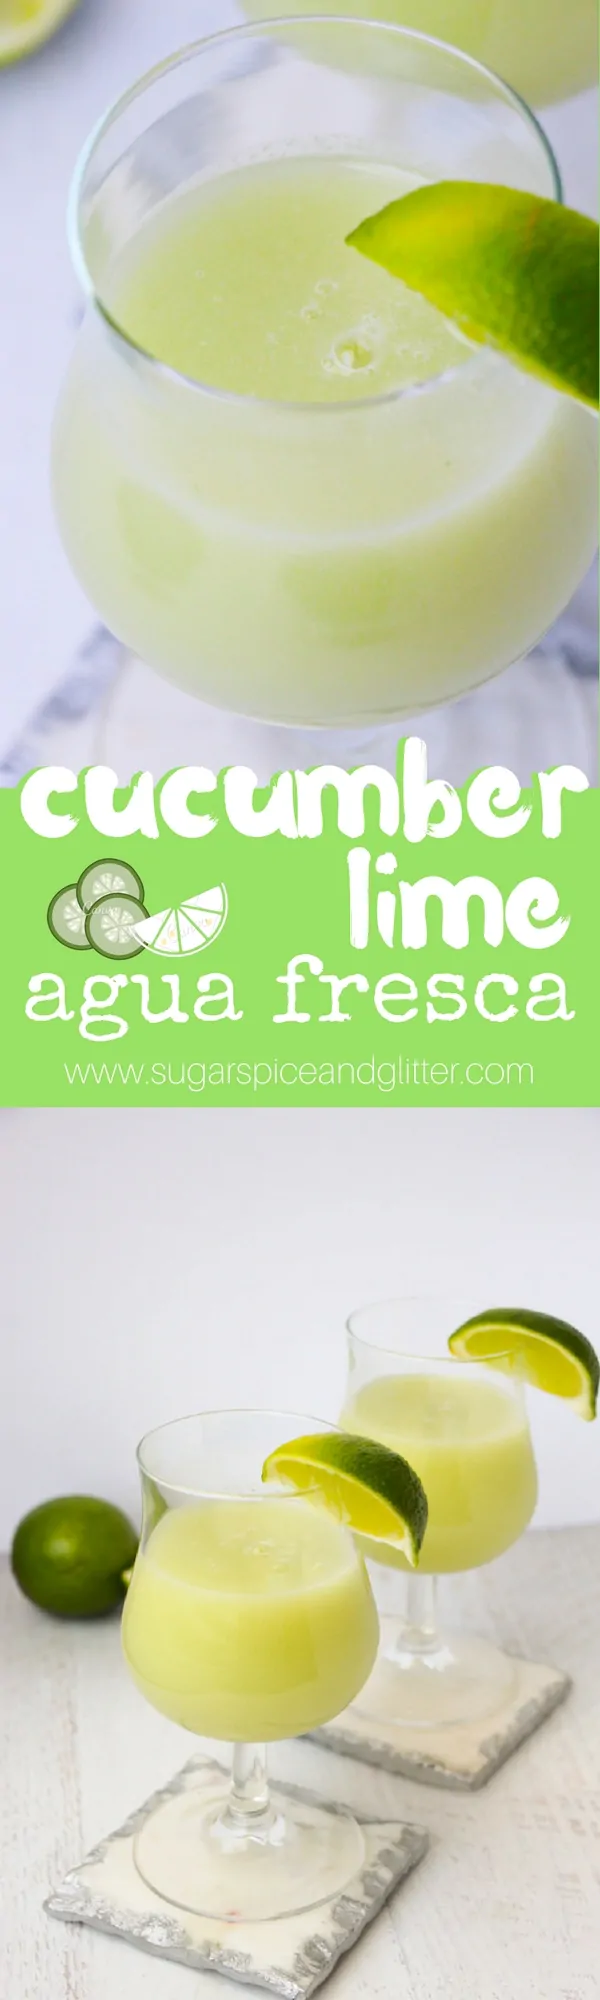 Cucumber spa water taken up a notch! This cucumber lime agua fresca is a refreshing summer drink with a hint of mint